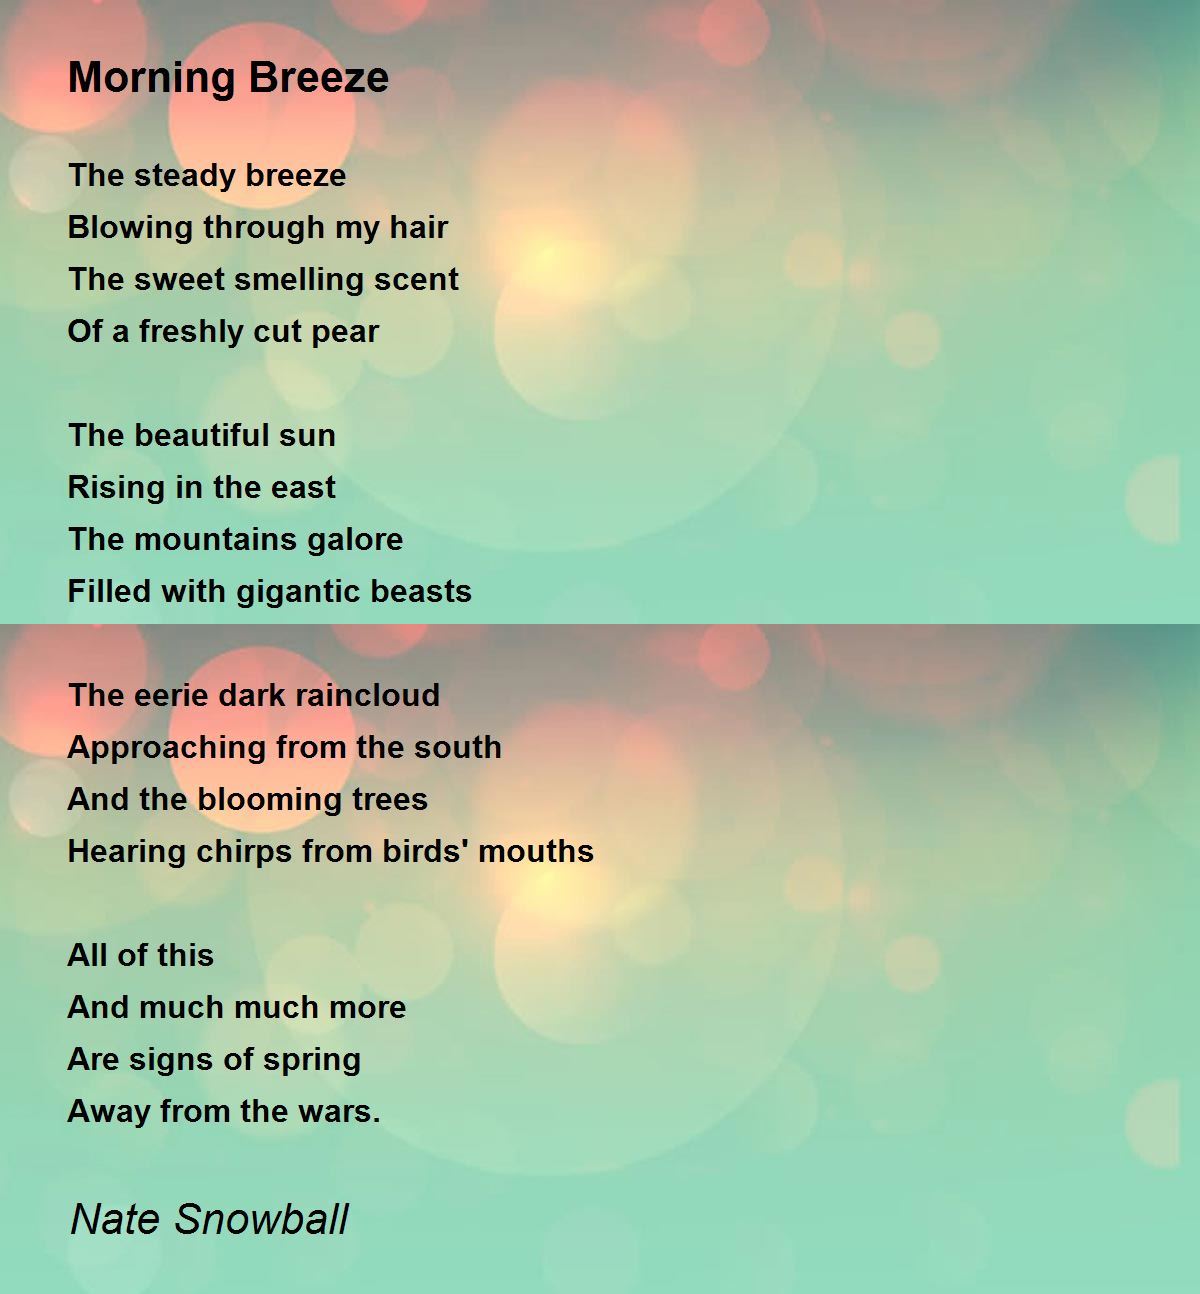 Morning Breeze - Morning Breeze Poem by Nate Snowball